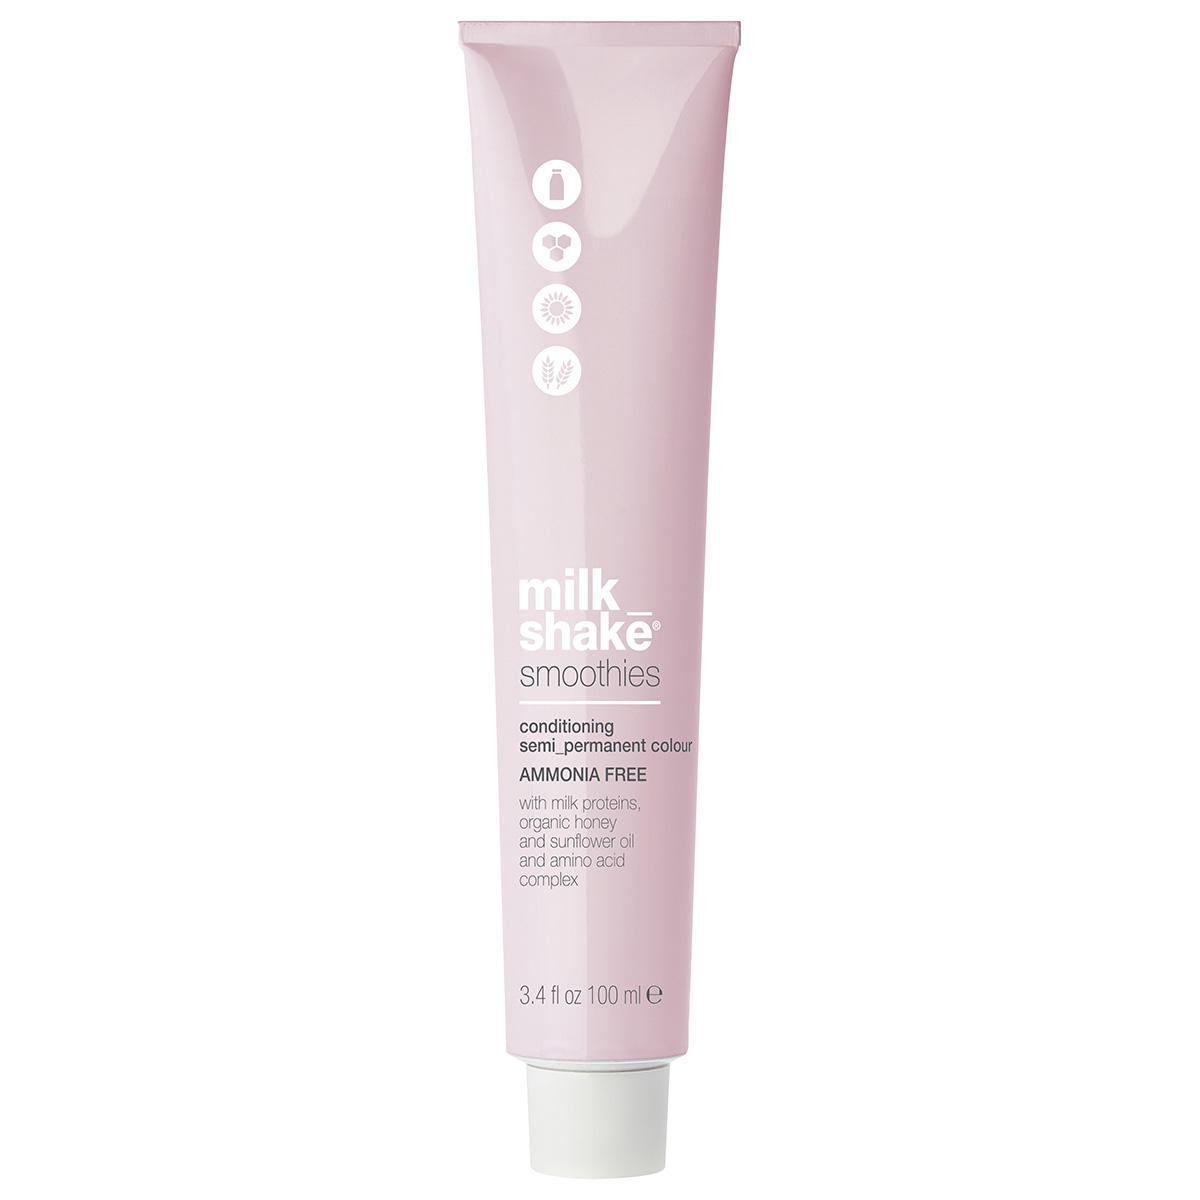 milk_shake Smoothies Conditioning semi_permanent colour 5.3/5G Light Golden Brown 100 ml - 1